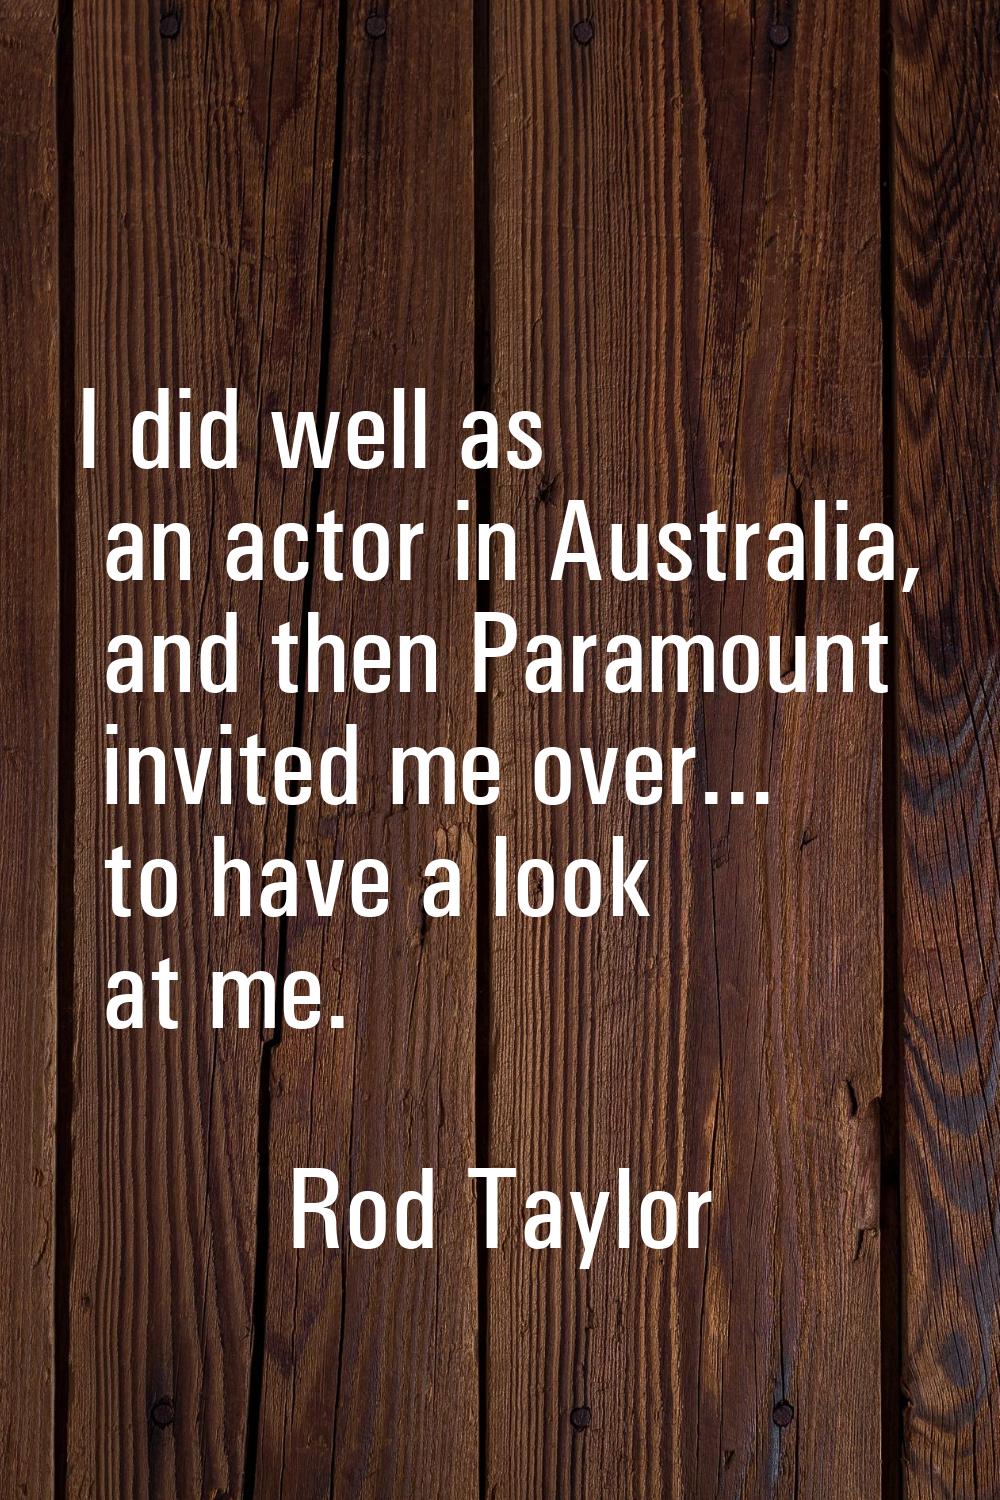 I did well as an actor in Australia, and then Paramount invited me over... to have a look at me.